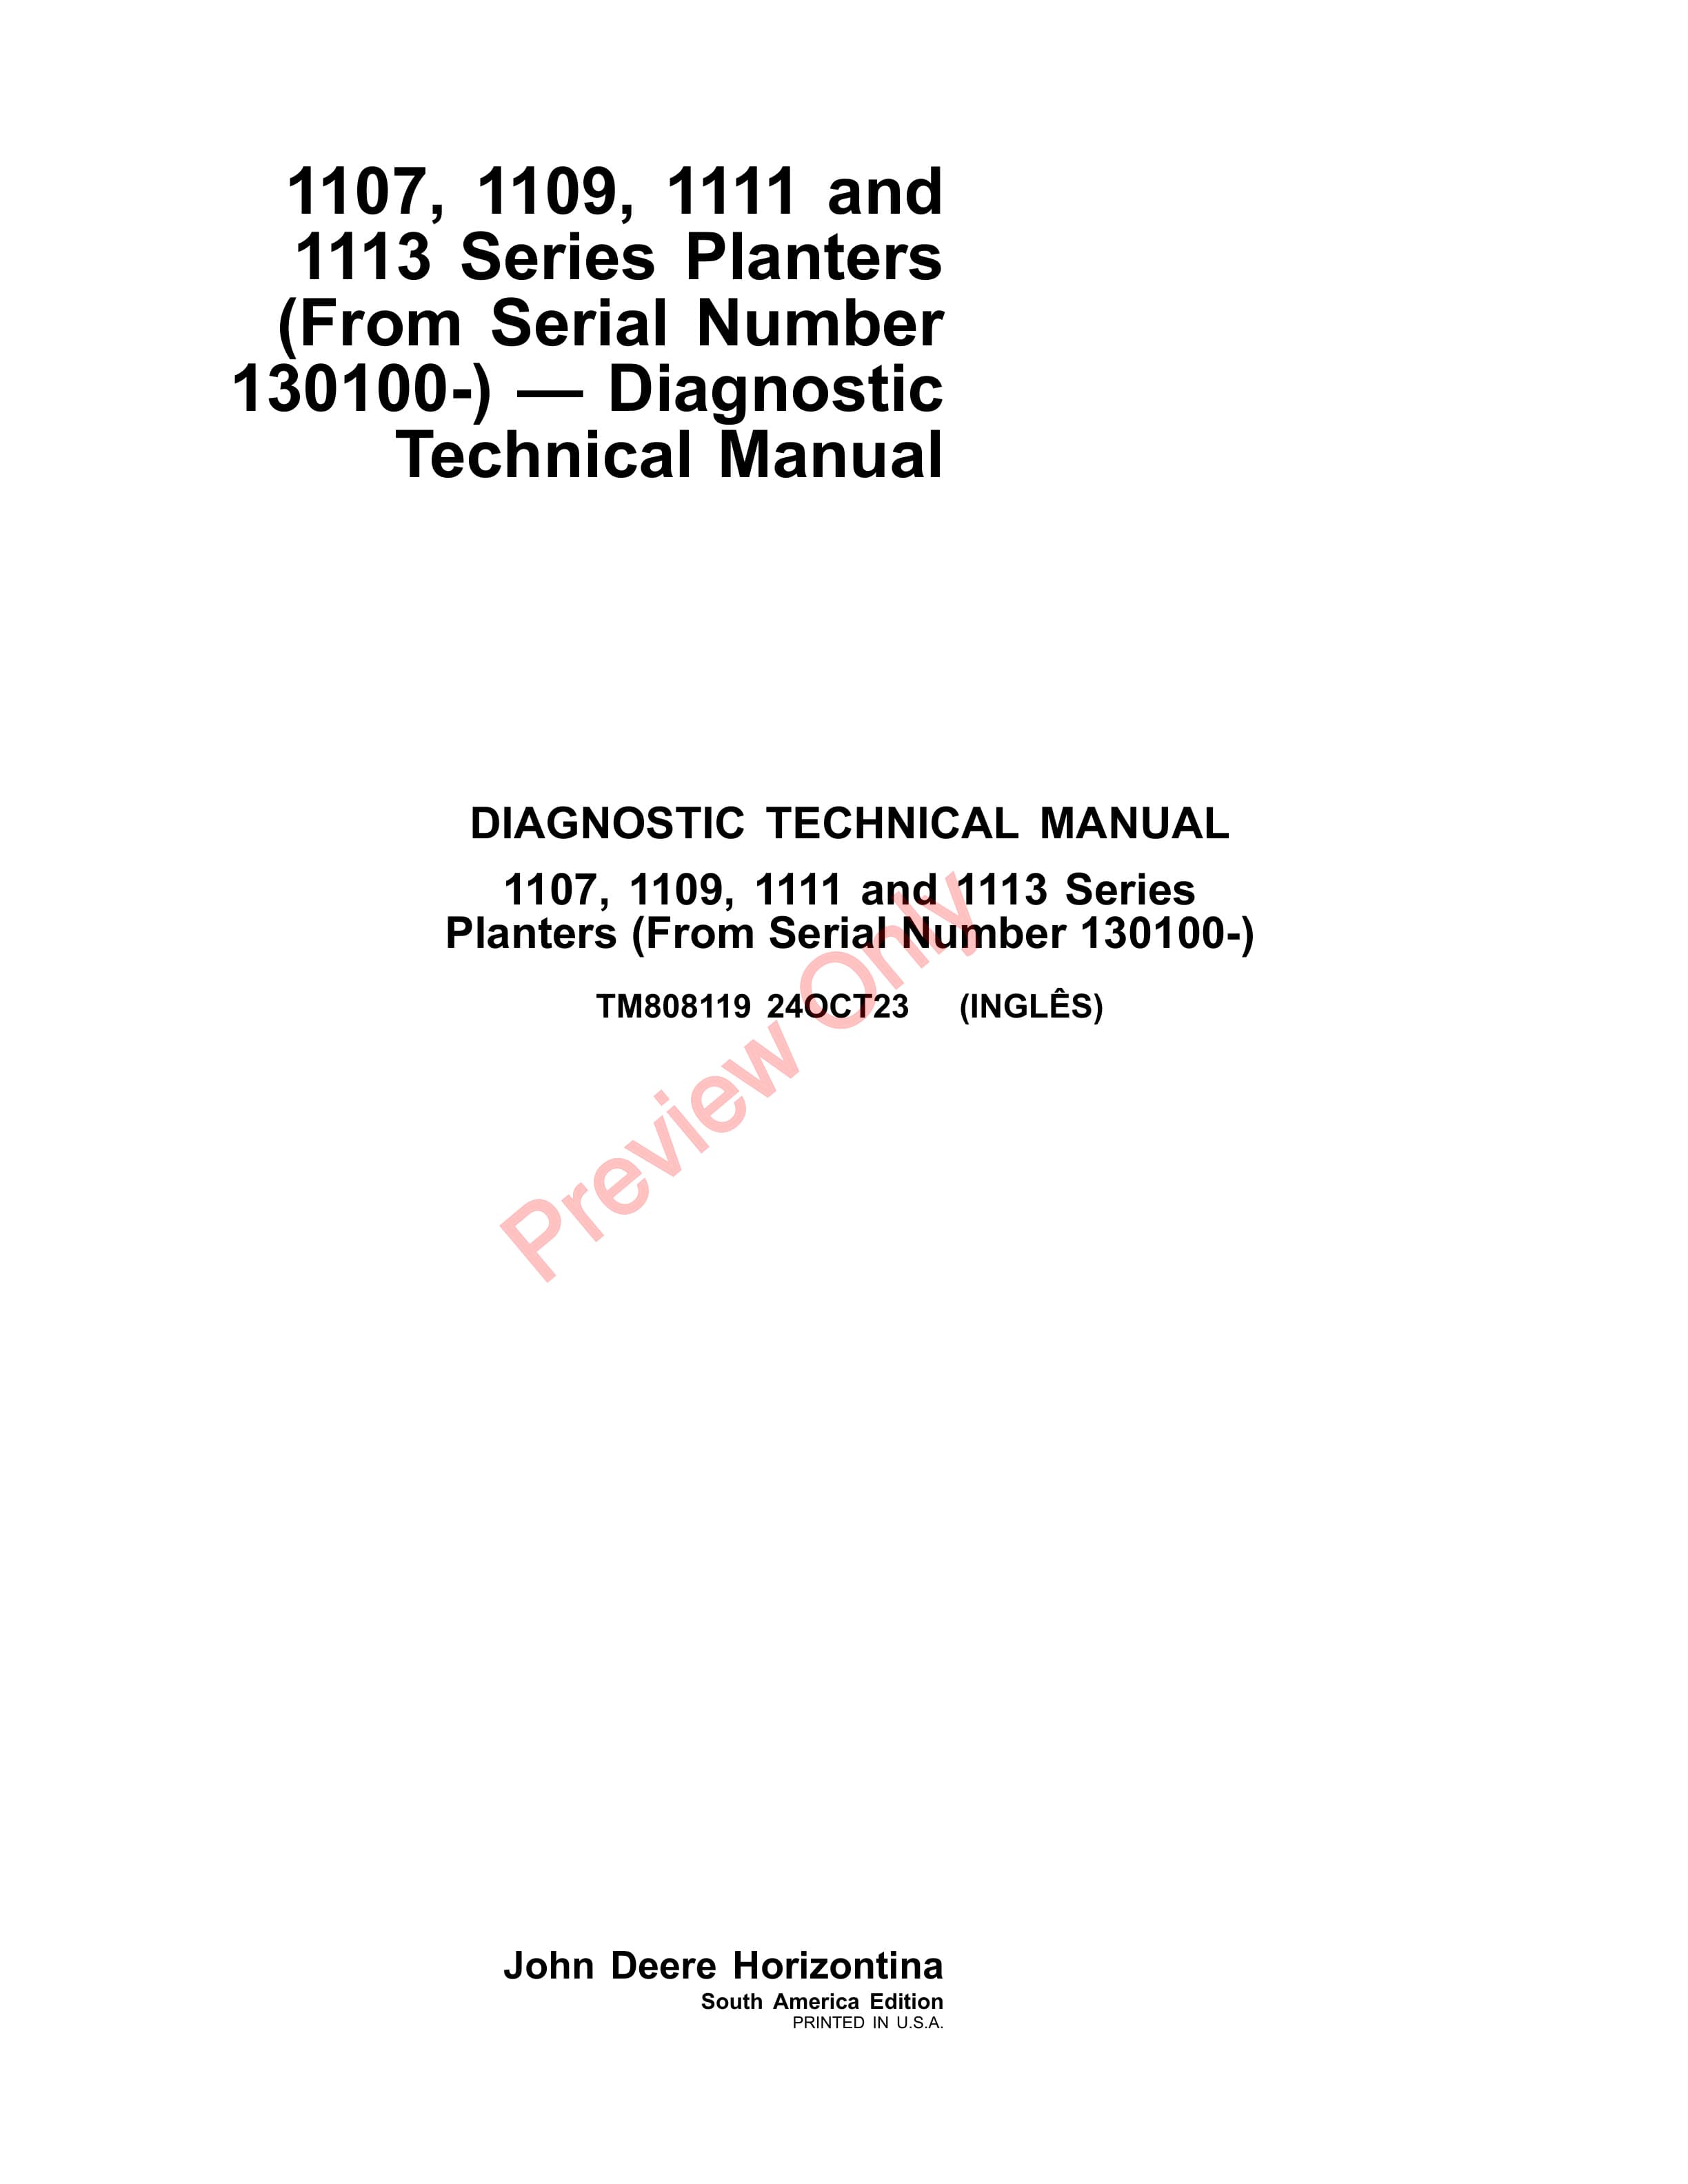 John Deere 1107 1109 1111 and 1113 Series Planters From Serial Number 130100 Diagnostic Technical Manual TM808119 24OCT23 1